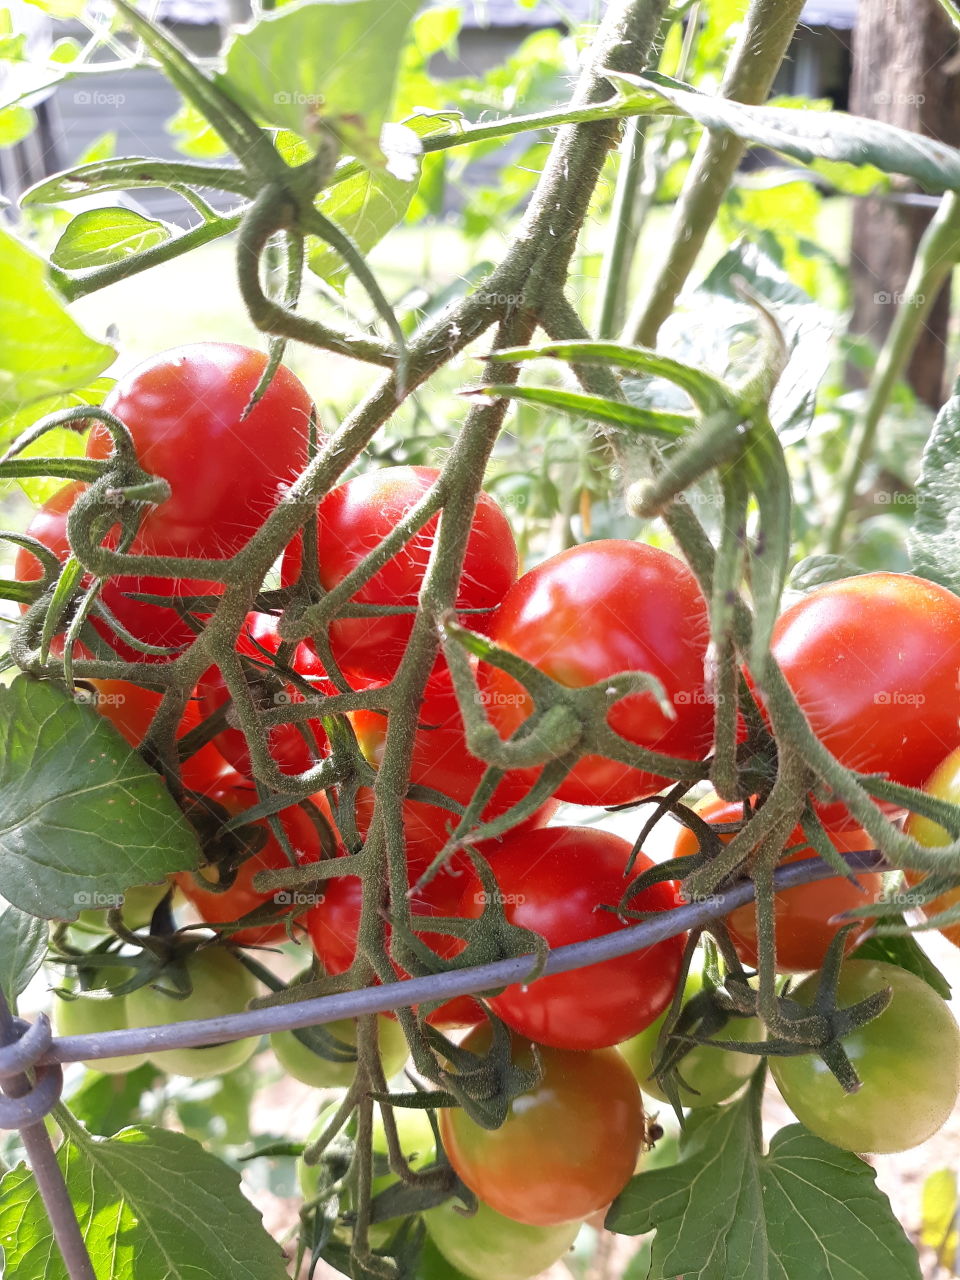 Yes, tomatoes are fruit!